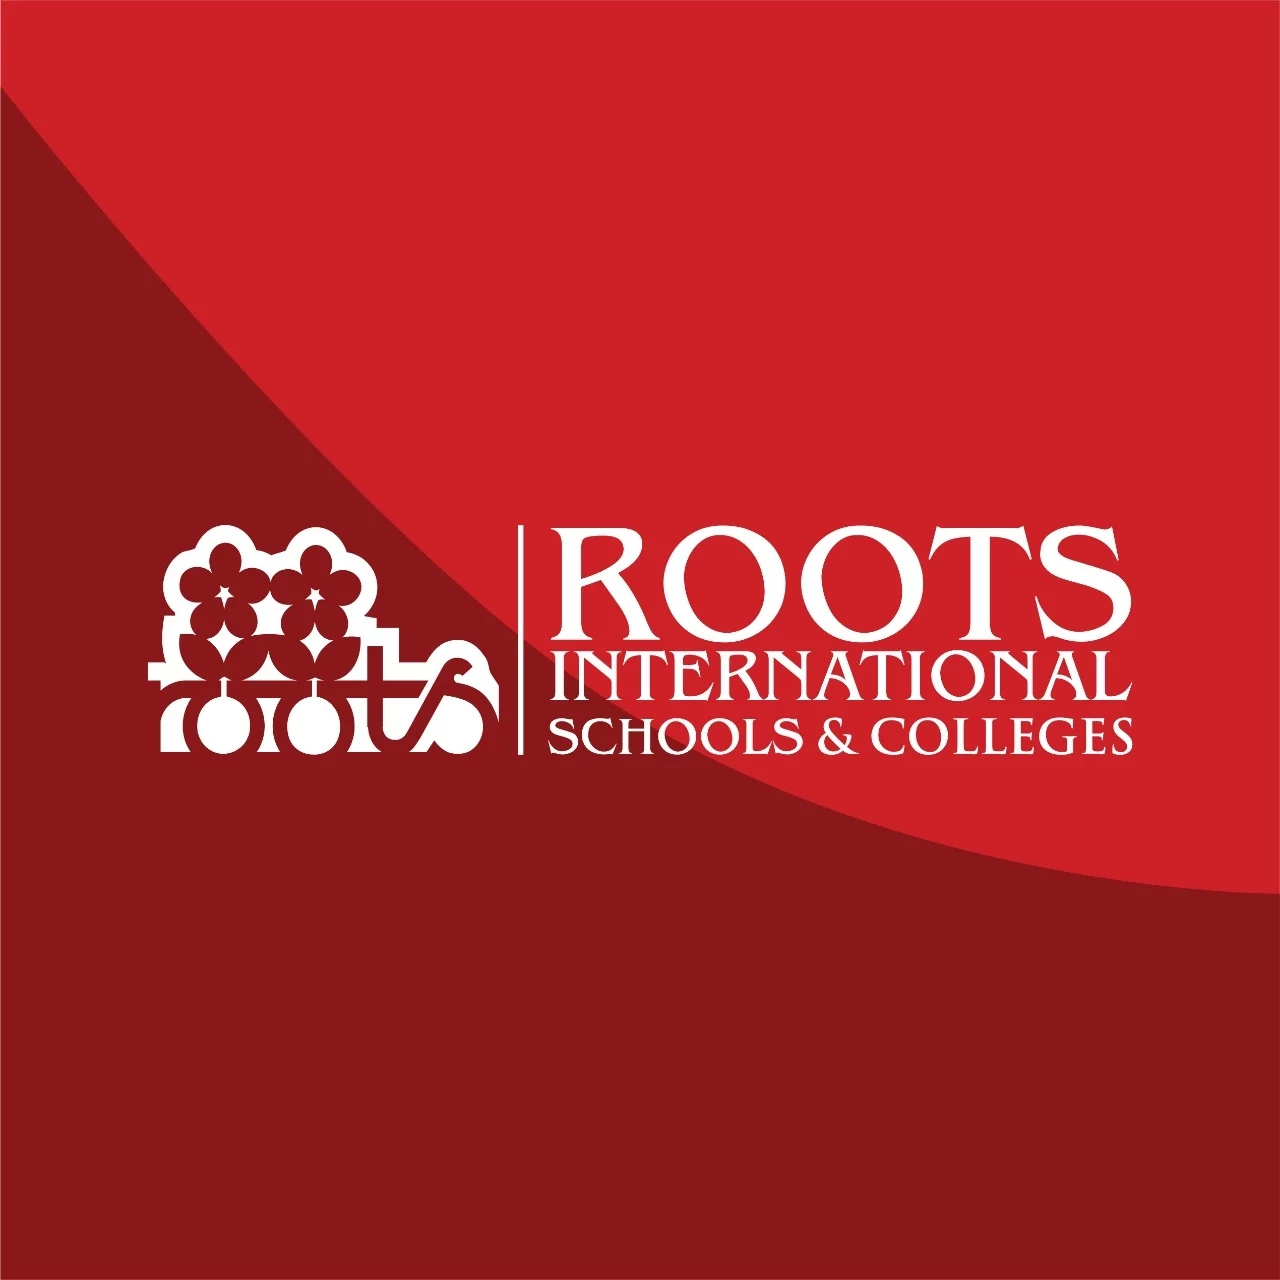 Roots International Schools – Focus on Social Entrepreneurship, Students Achievement, and Opportunity and Discovery